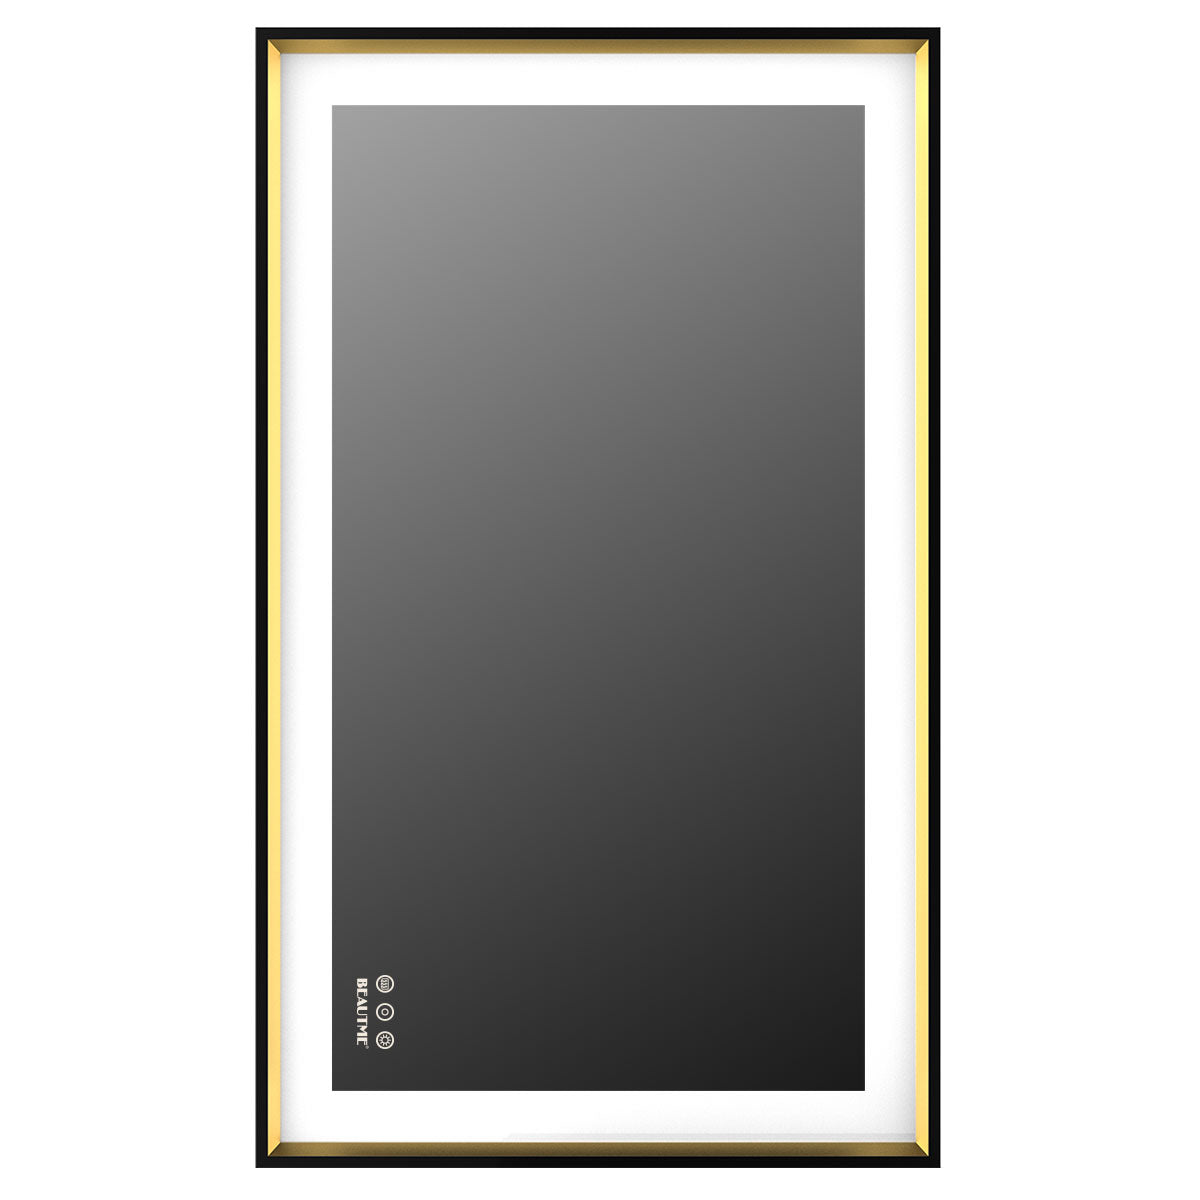 40" x 24" Bathroom Mirror with LED Lights Lighted Makeup Vanity Mirror Wall Mounted Large Size Rectangular Anti-Fog Memory Dimmable Touch Sensor-Boyel Living